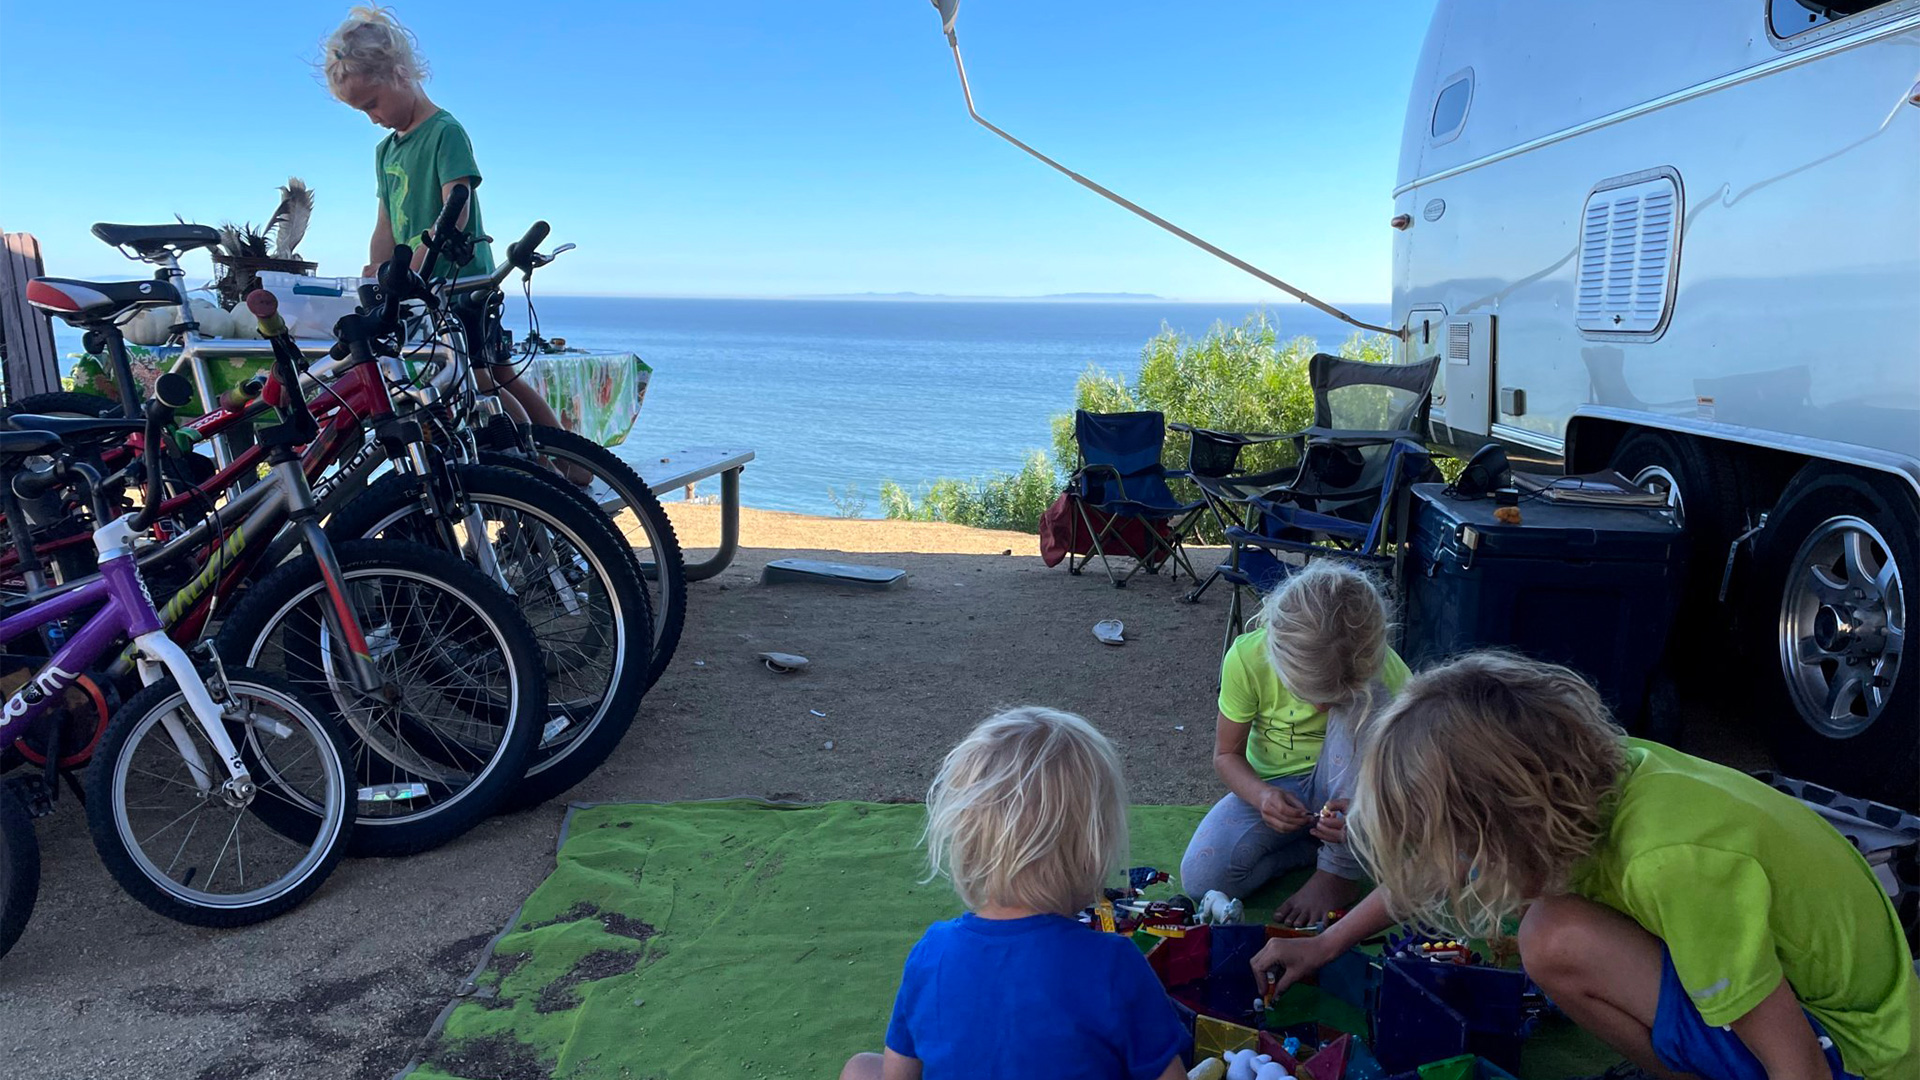 Three kids playing outside on a mat under the awning of an Airstream travel trailer while another camper gets a bike out.